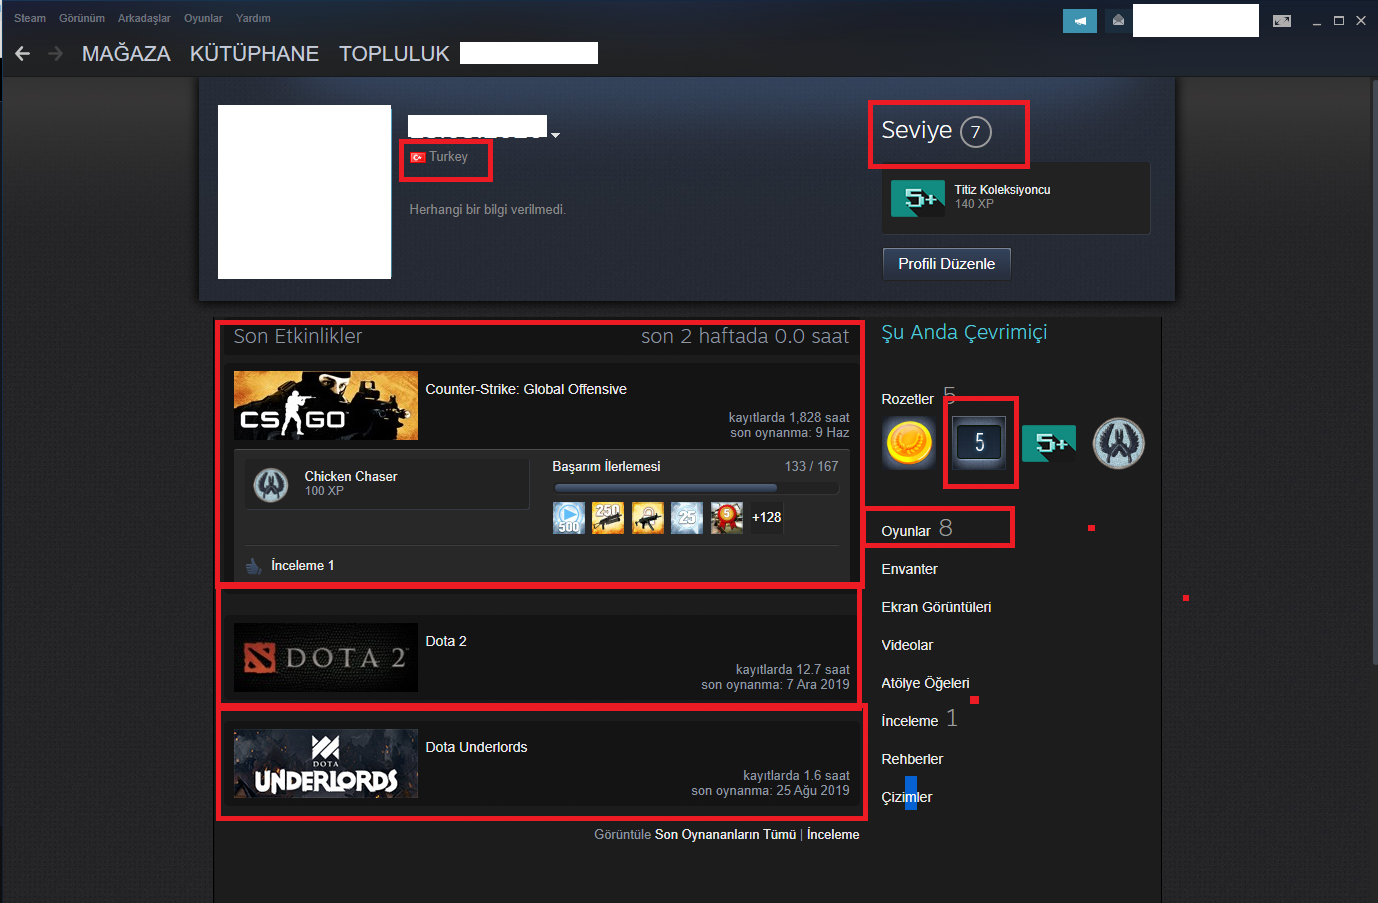 How to send money steam фото 90